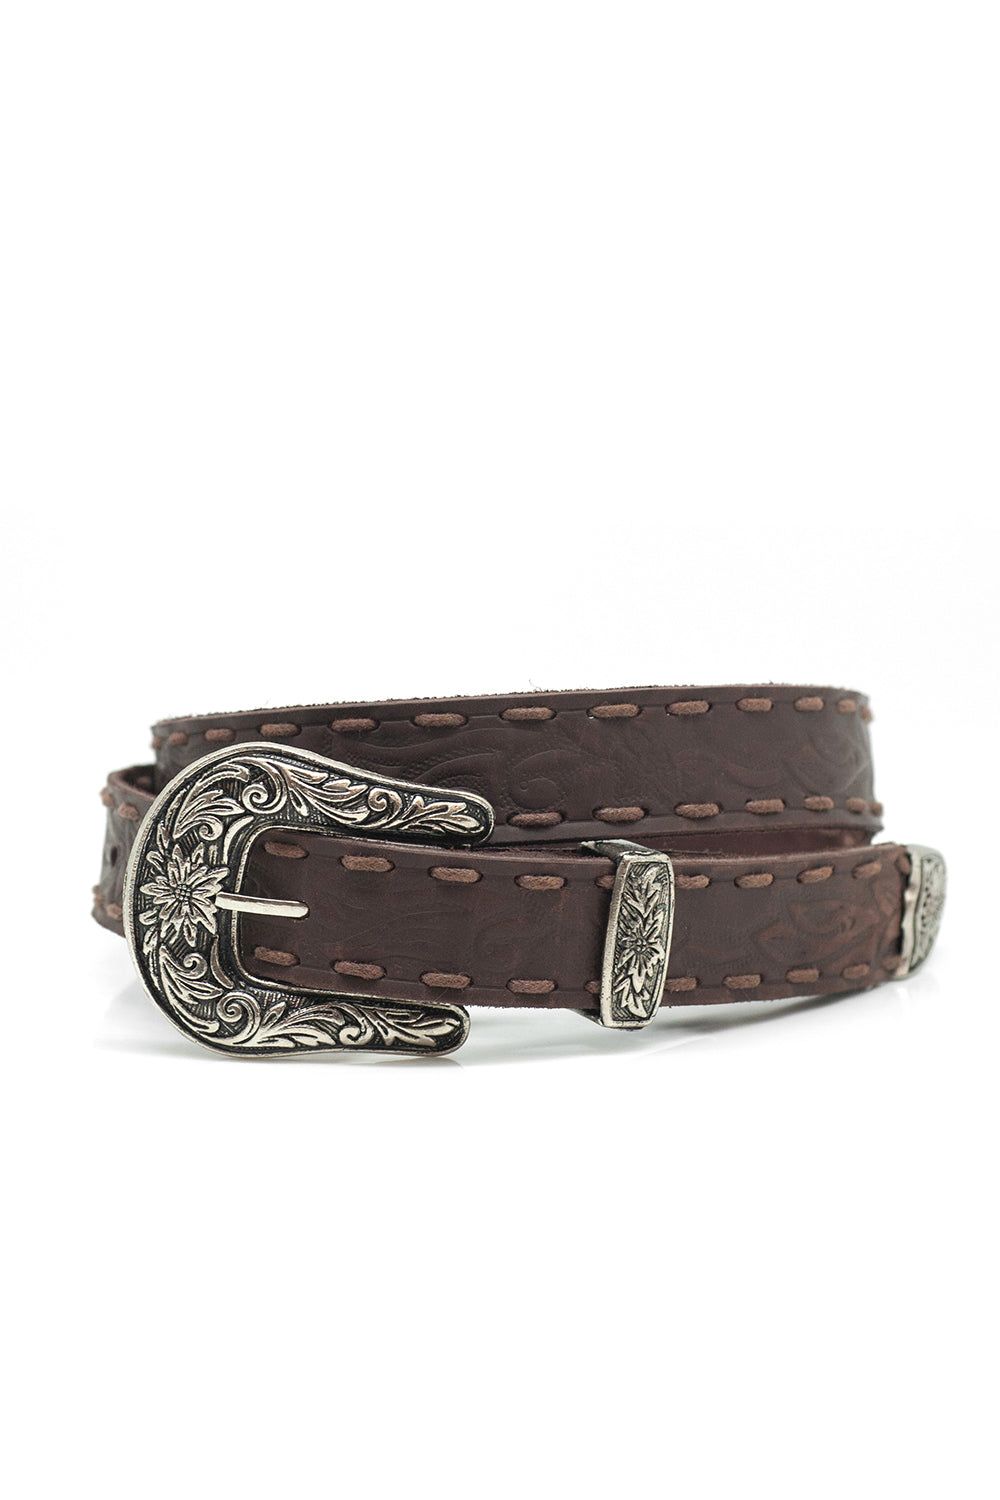 The Gypsy Queen Belt - Antique Brown - Tulle and Batiste